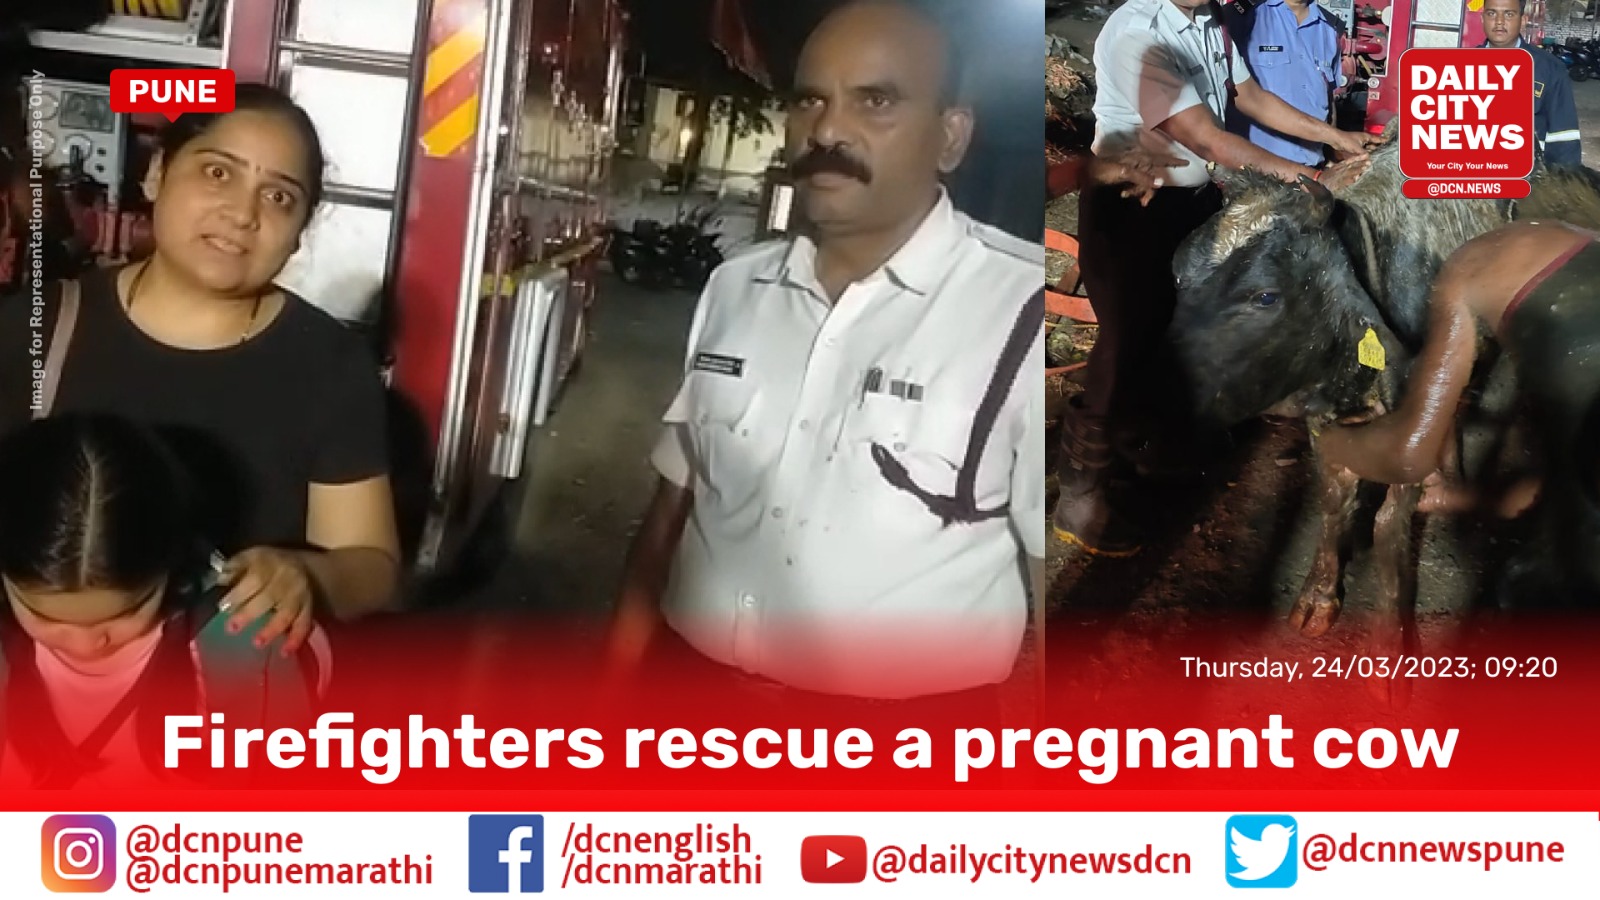  Firefighters rescue a pregnant cow